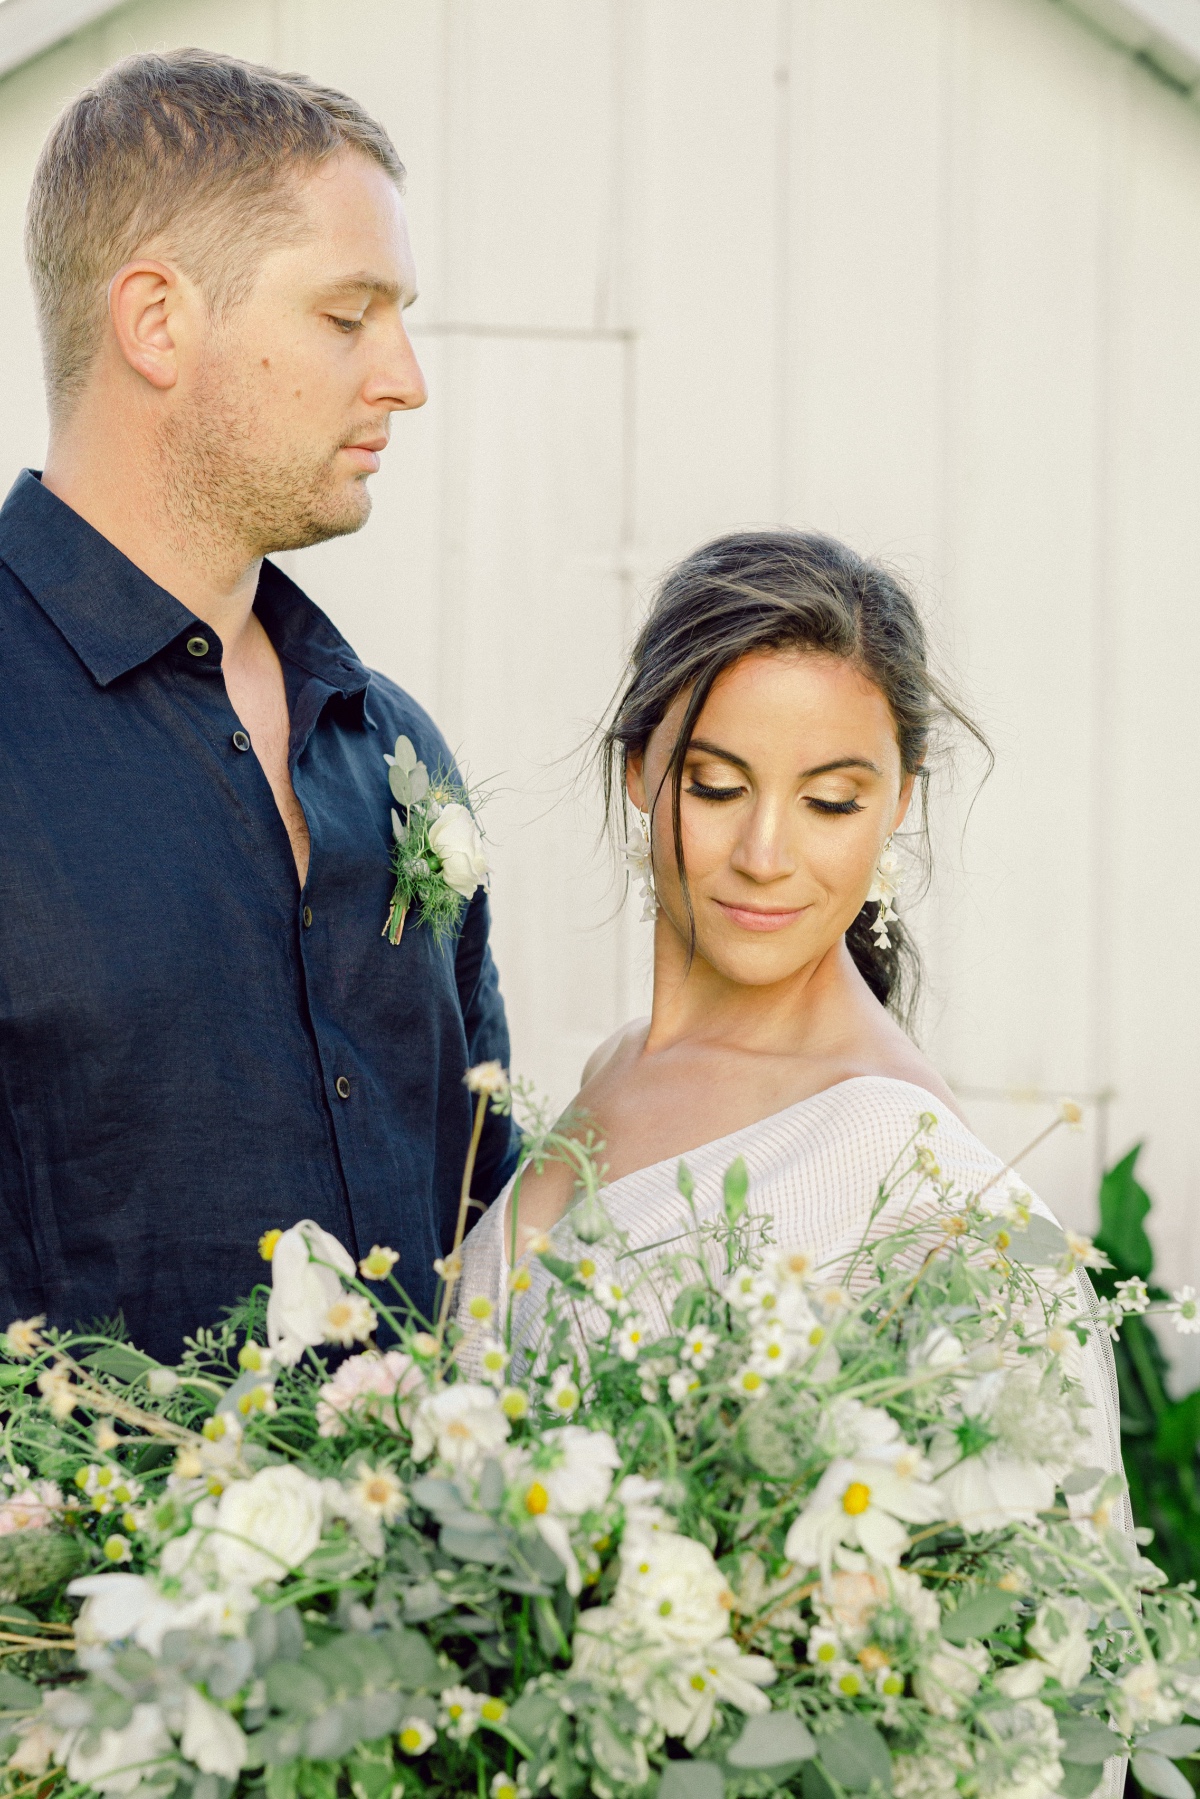 Chip and Joanna Would Be So Proud of This Magnolia-Inspired Microwedding In the PNW